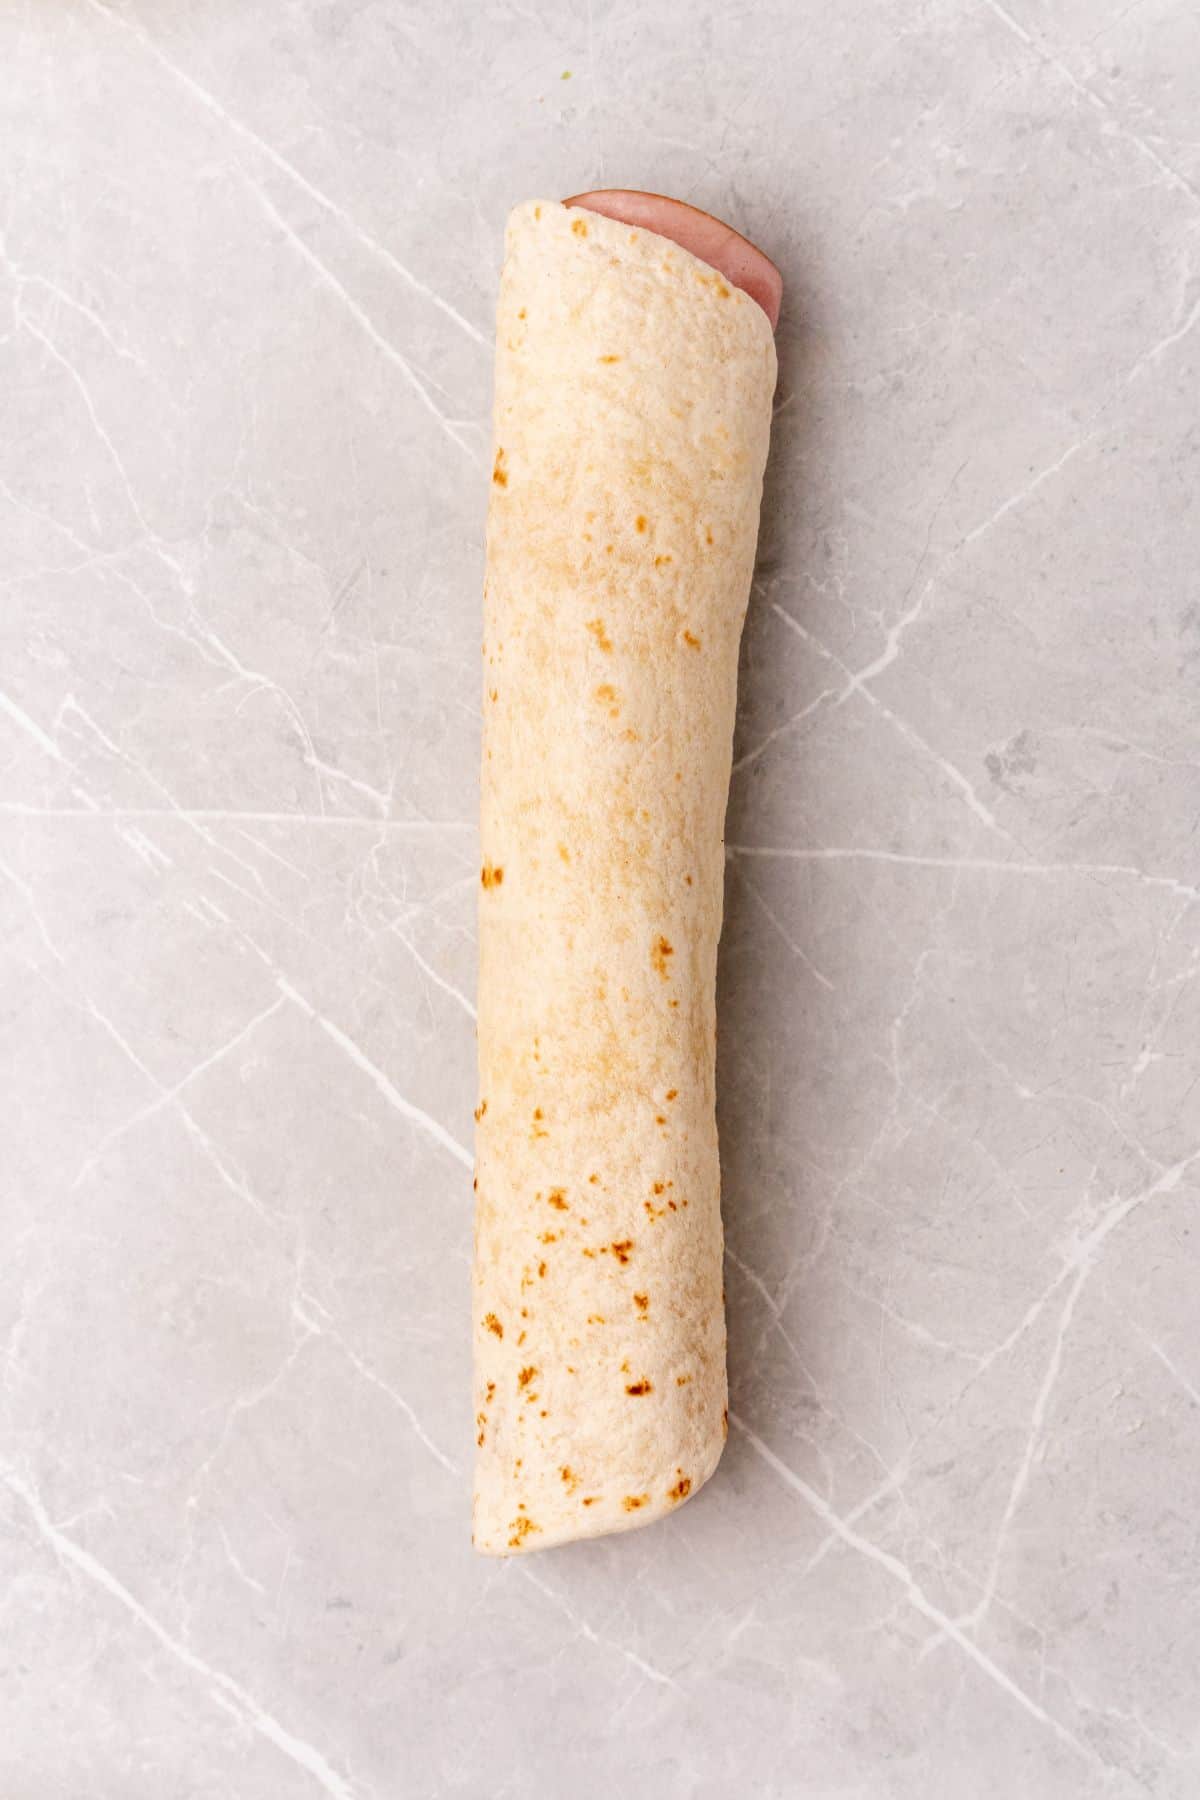 A hot dog wrapped in a tortilla, also known as a "wrap.